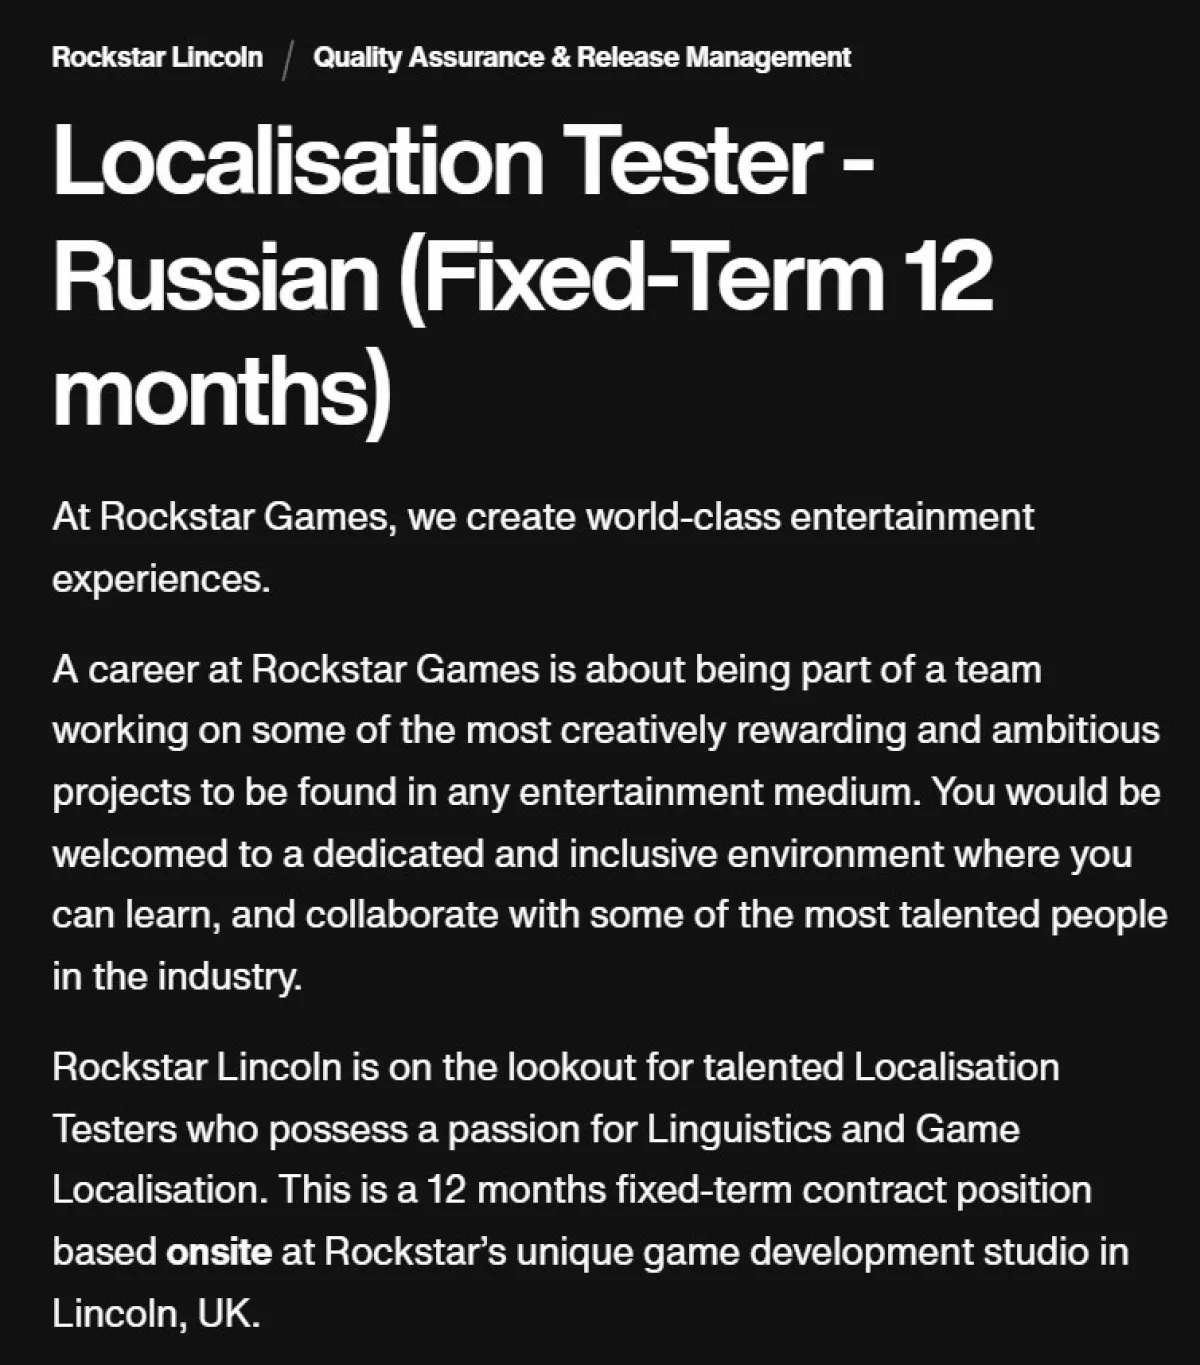 Rockstar is looking for a Russian localization tester